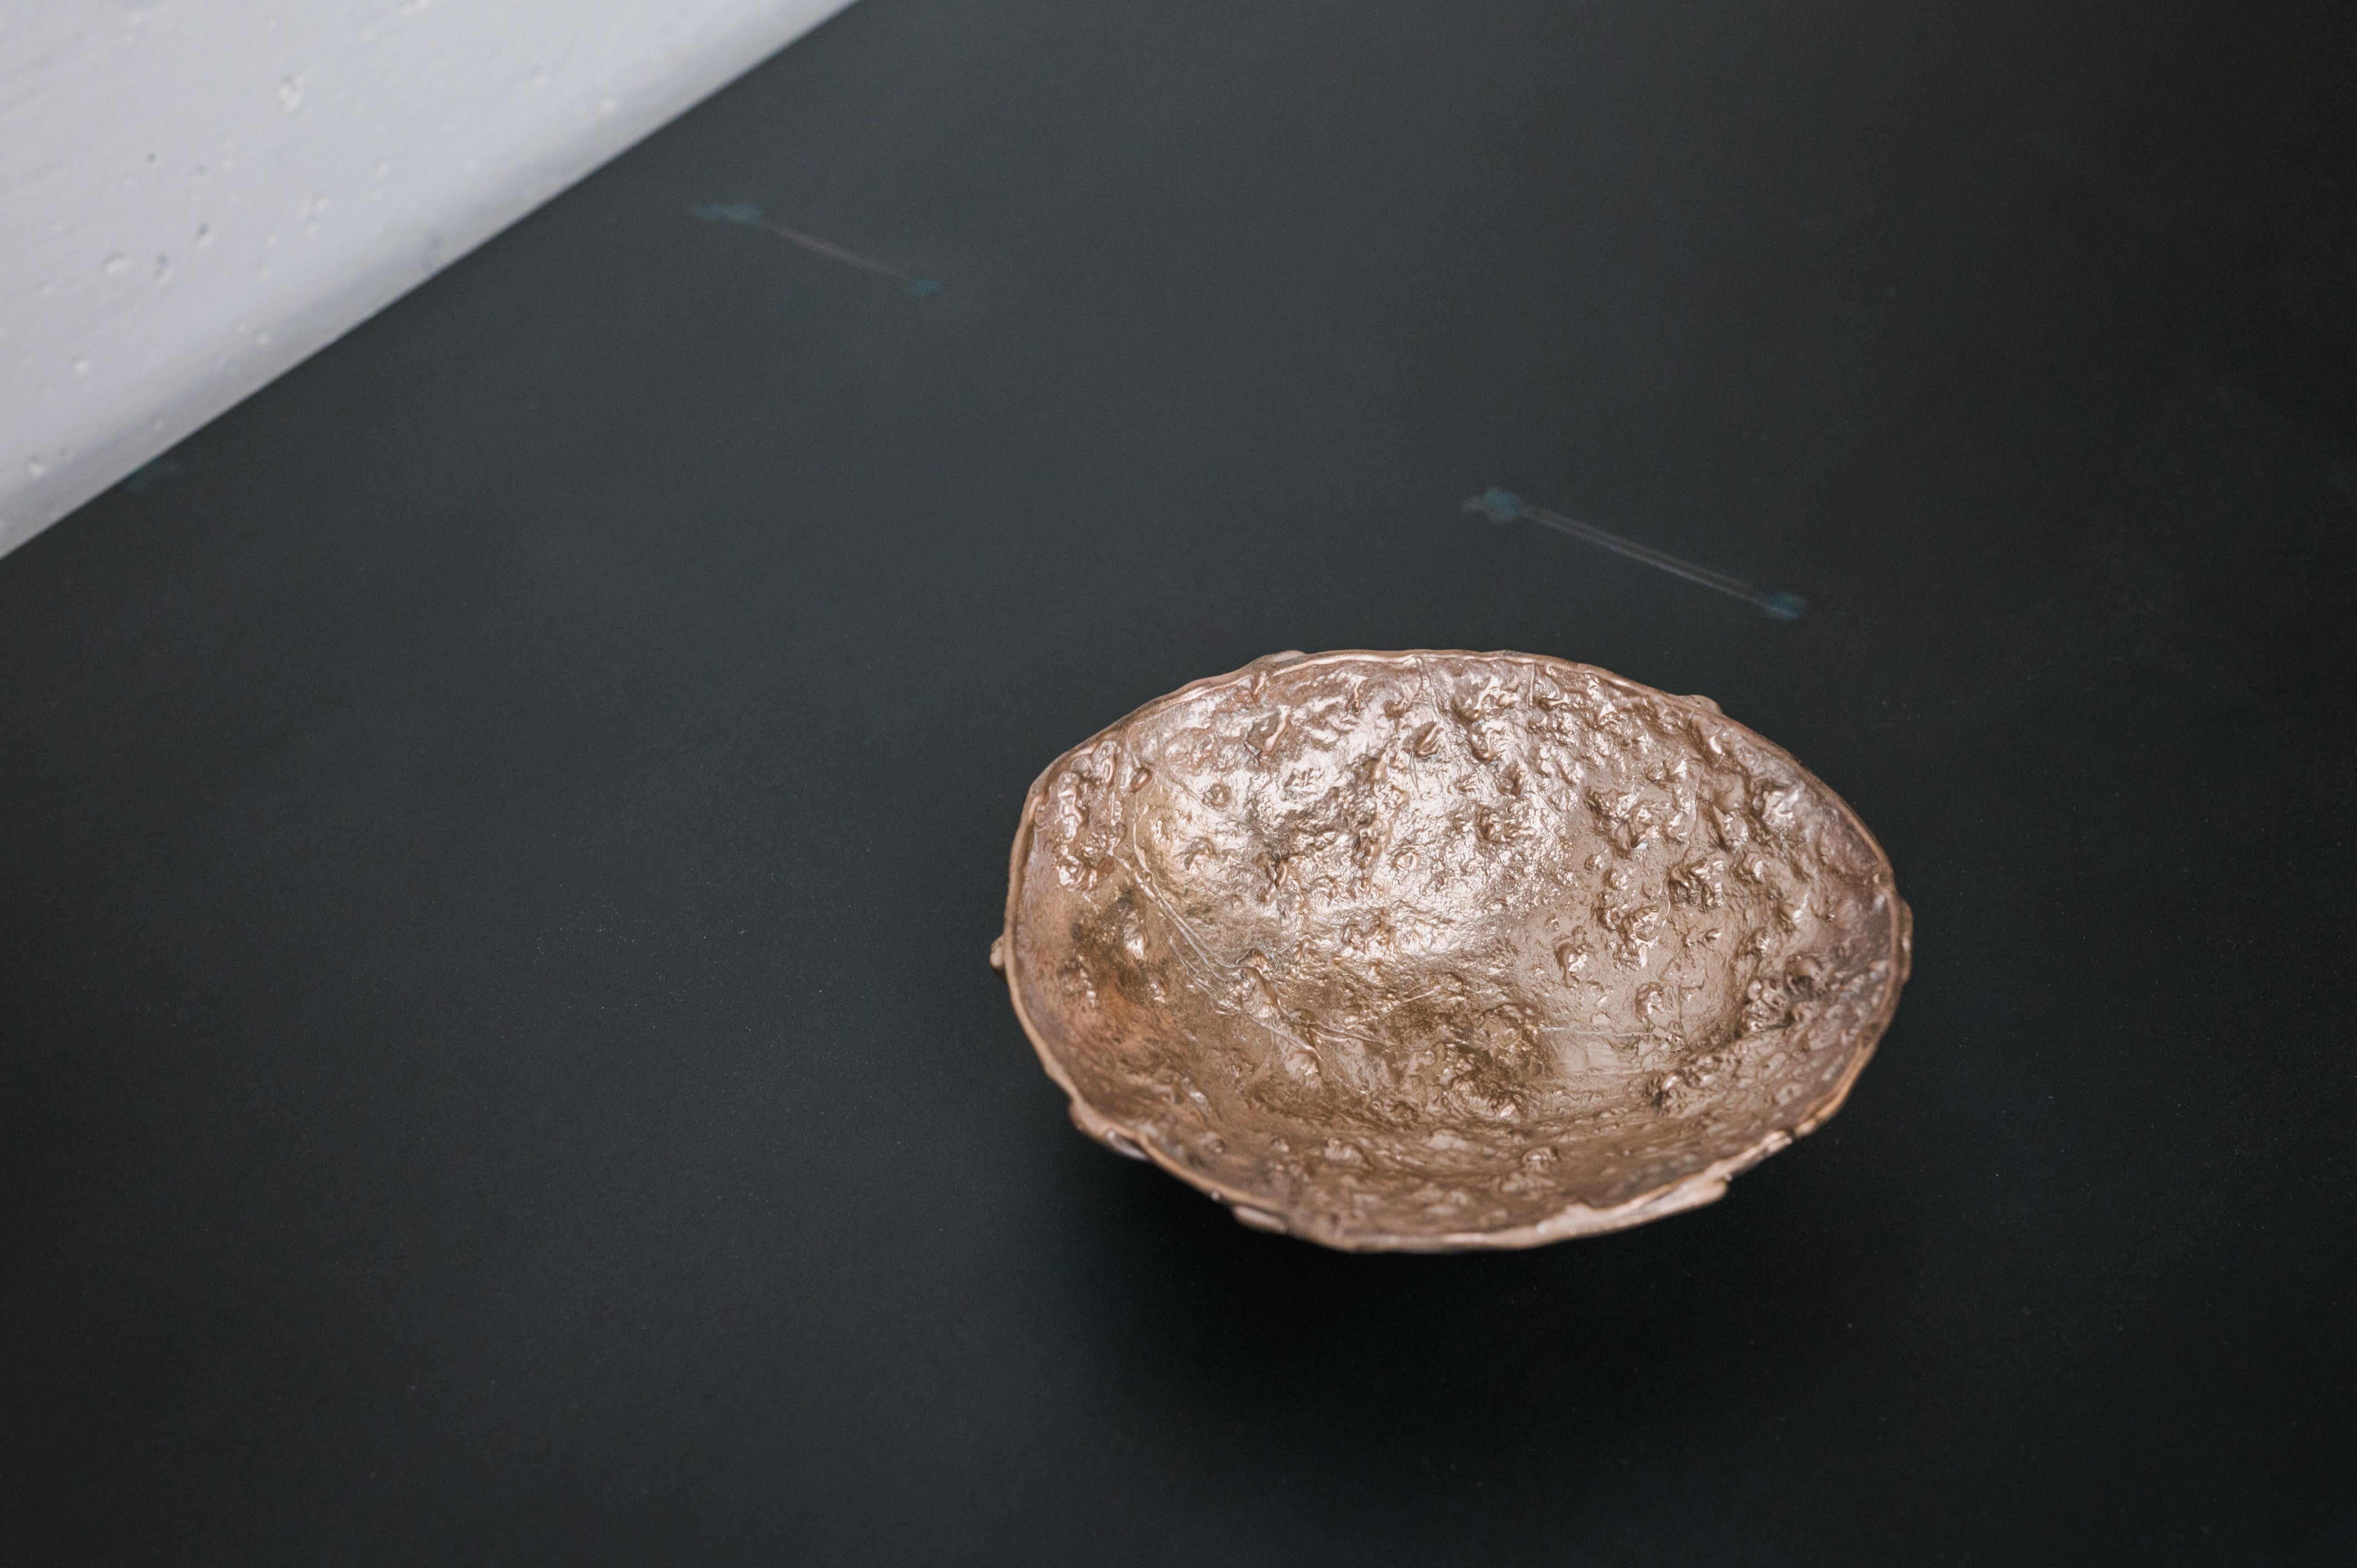 Borrowed Forms takes on loan shapes of the natural world and translates them into domestic objects. Rocks, charred wood, and forest debris from the Pacific Northwest are selected for form and texture, and their impressions are captured in poured